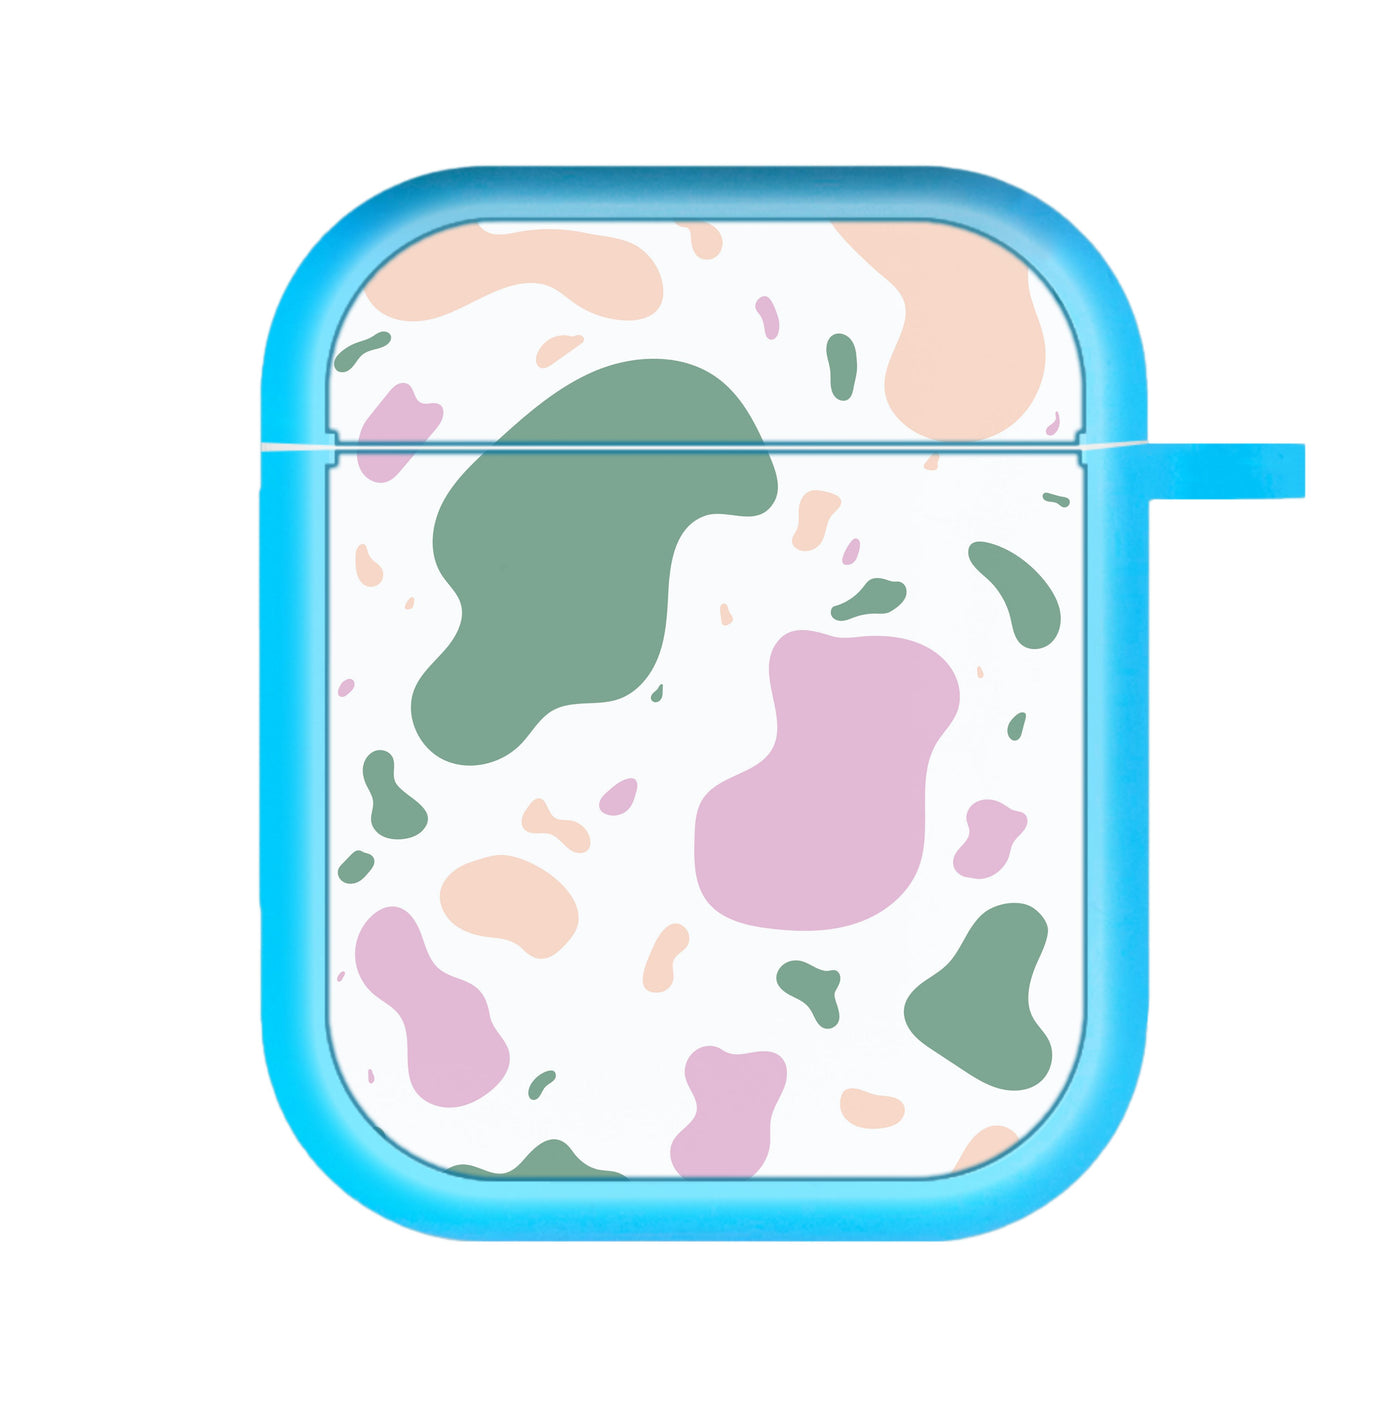 Abstract Pattern 8 AirPods Case